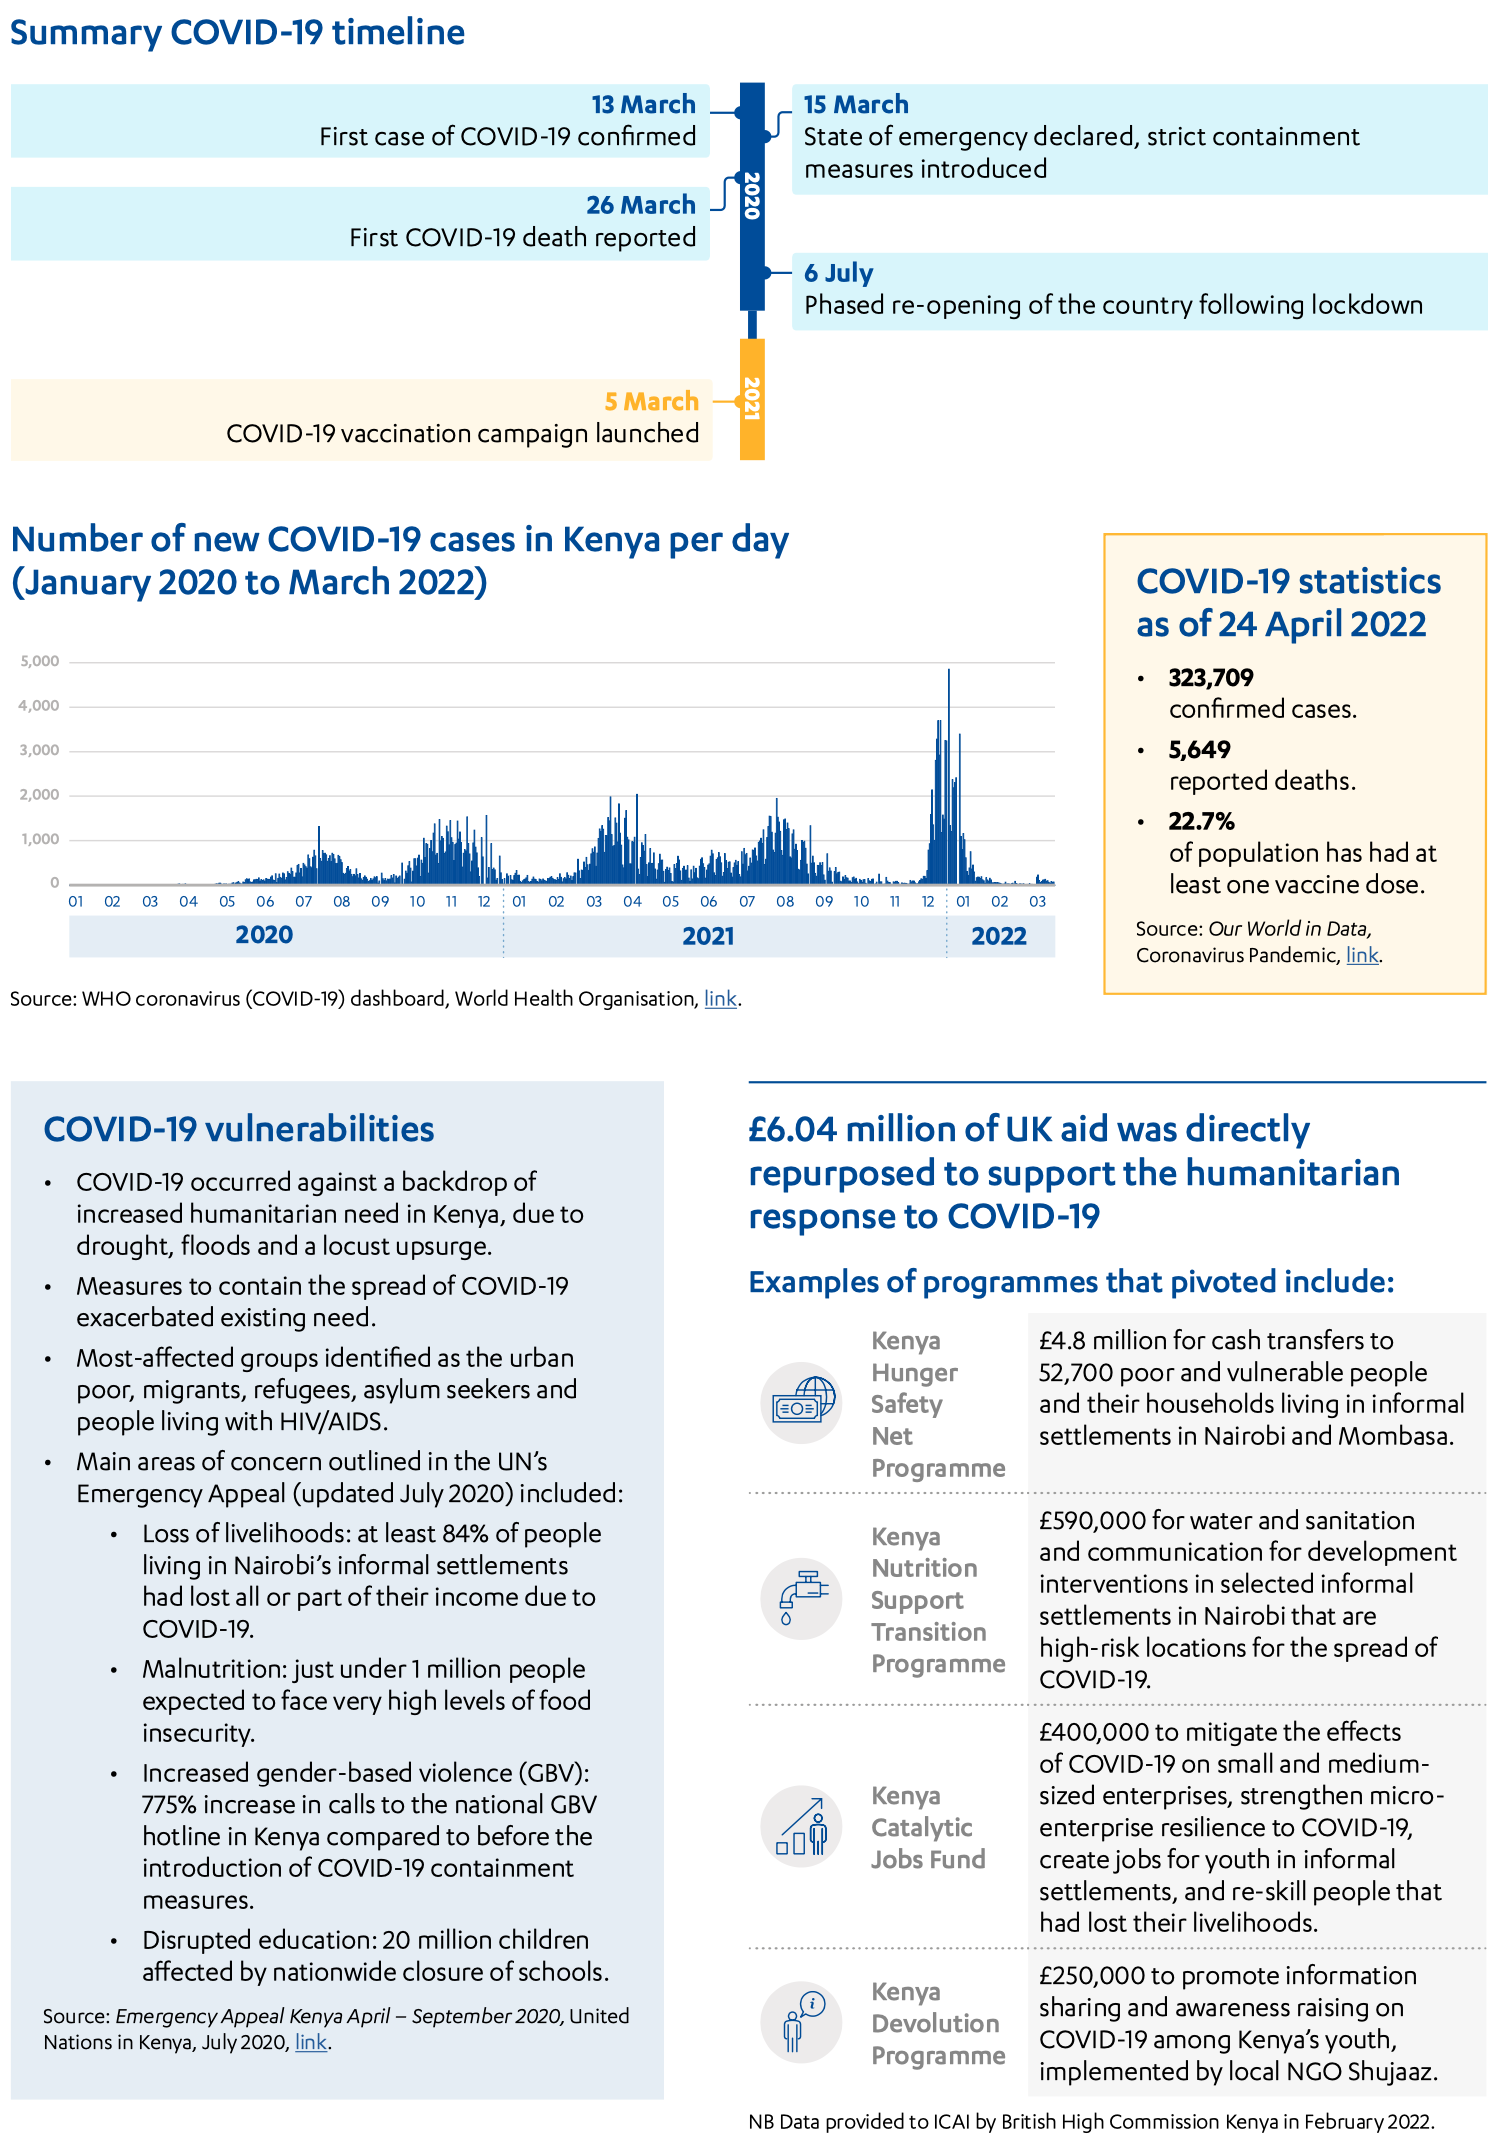 Kenya case study, including Summary COVID-19 timeline, COVID-19 statistics, COVID-19 vulnerabilities and examples of UK aid repurposed to support the humanitarian response to COVID-19